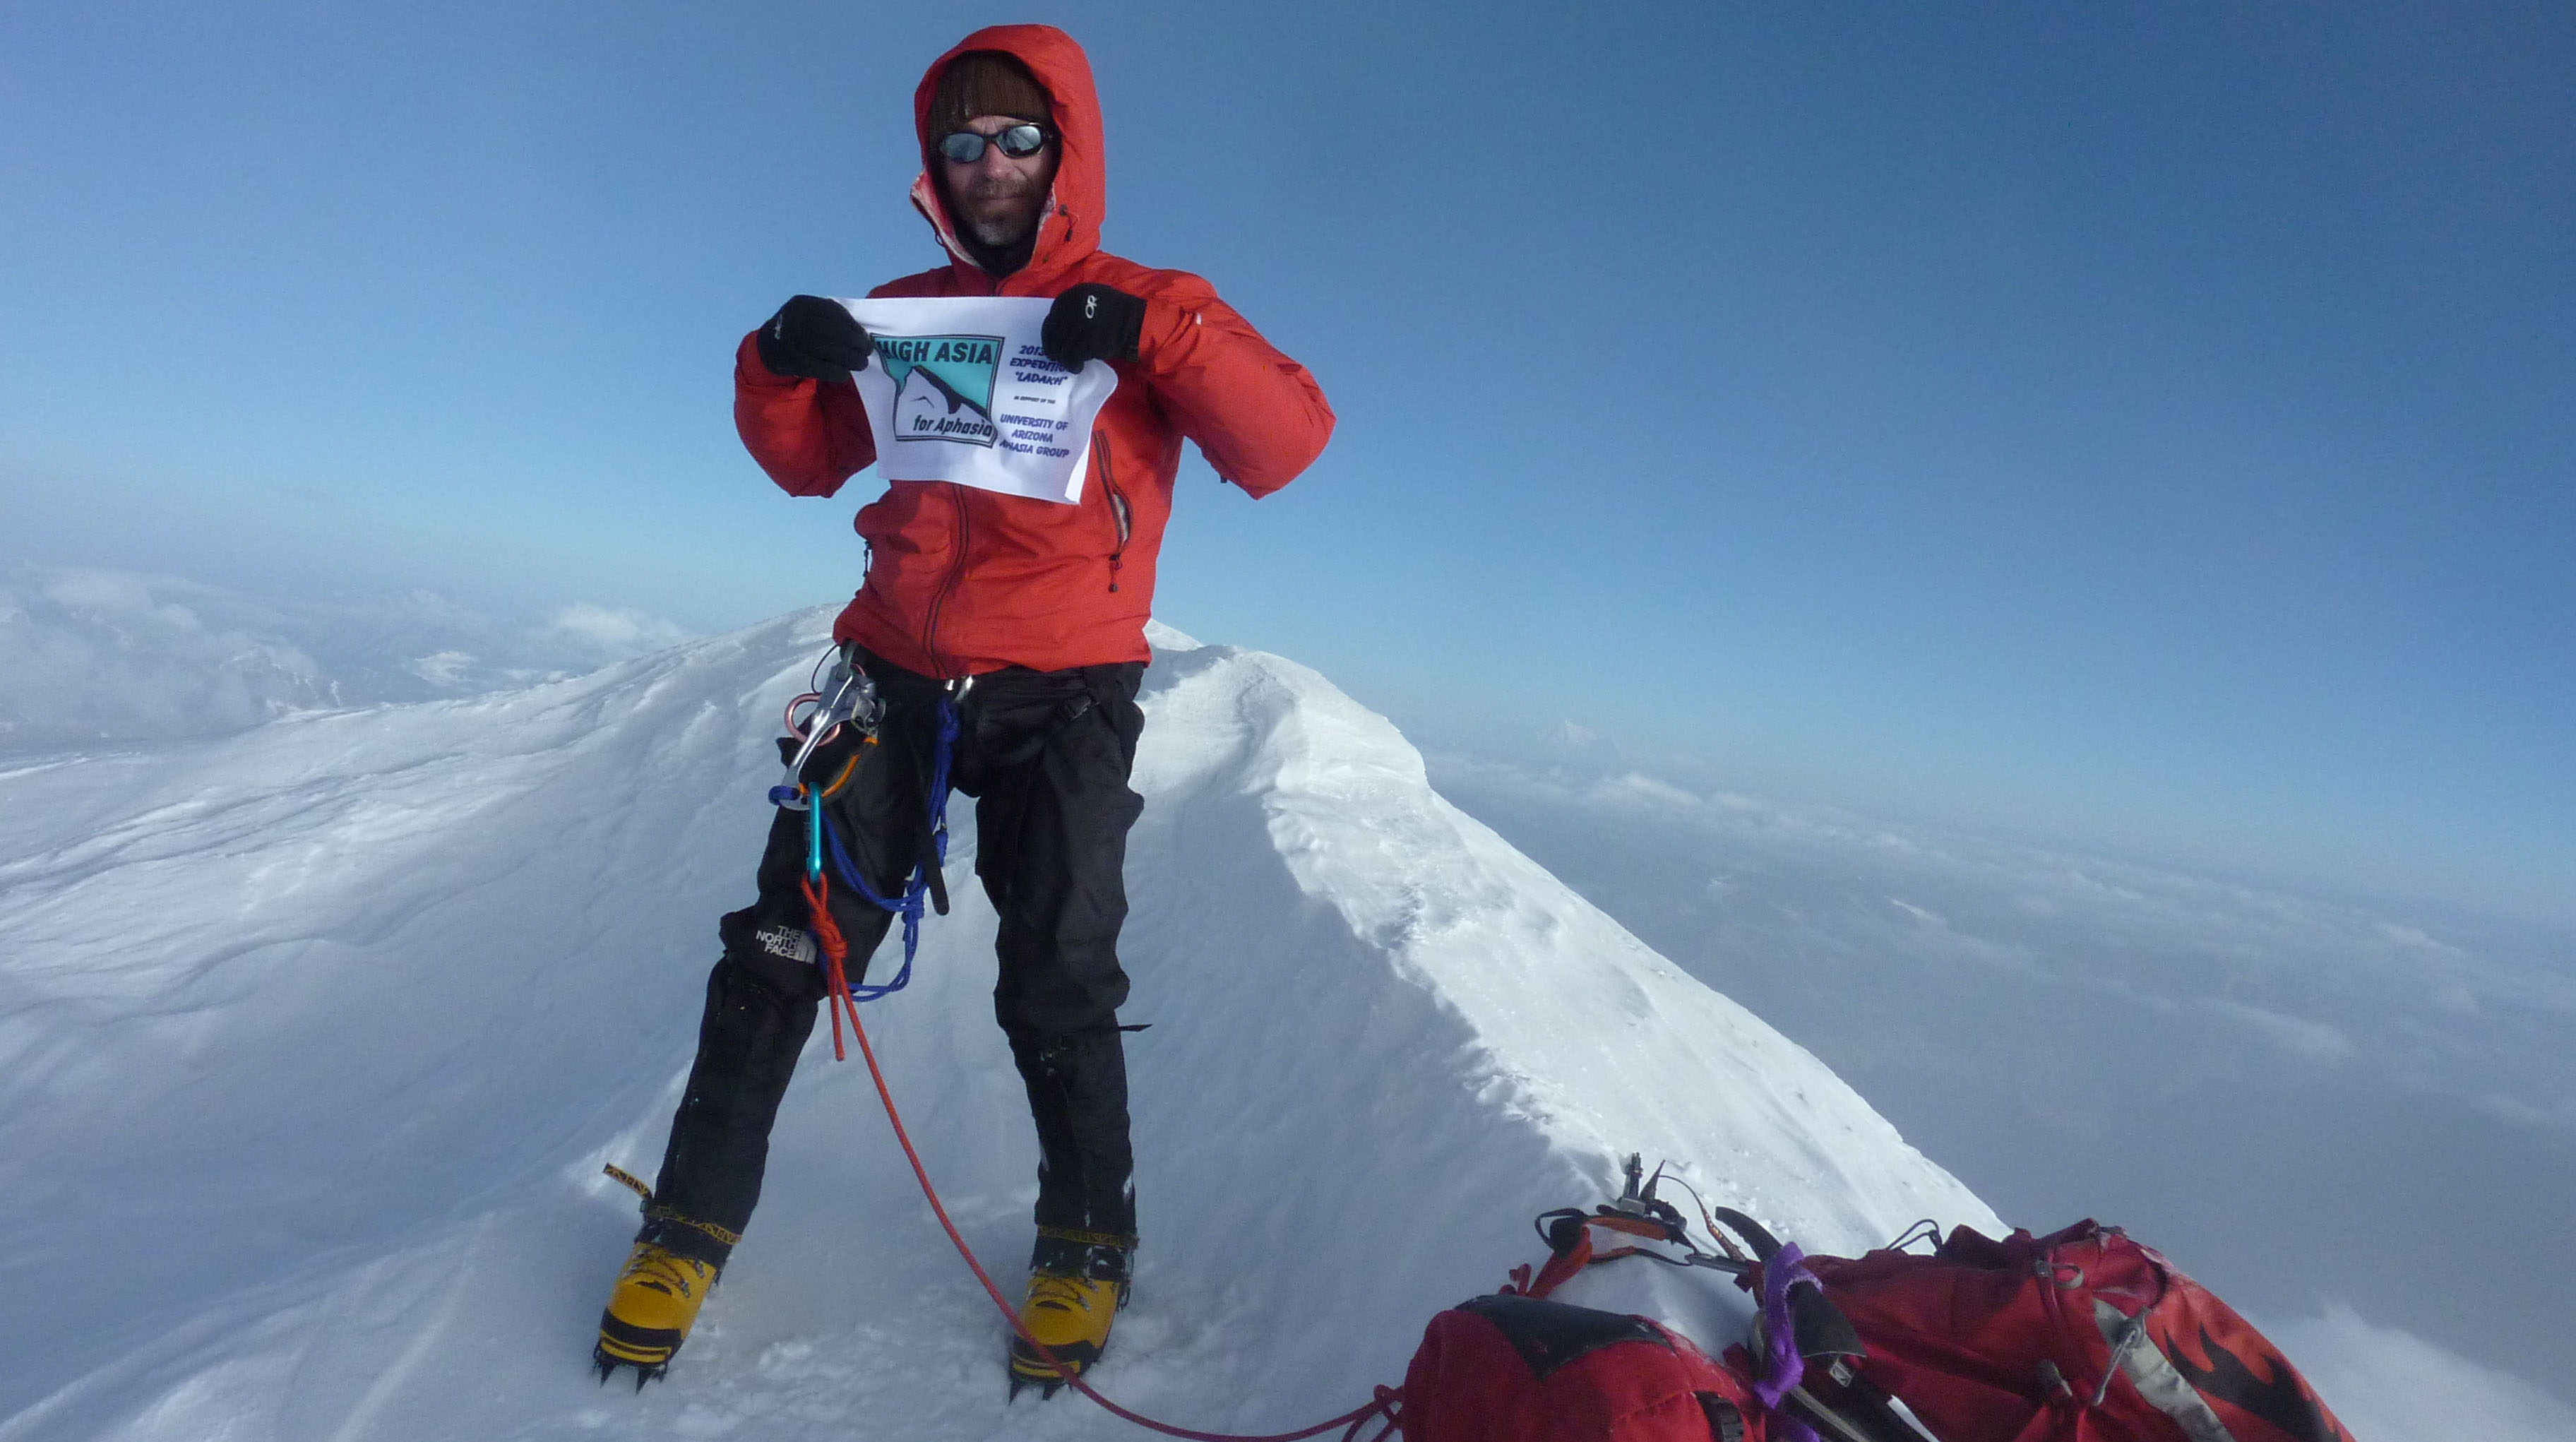 Greg Leonard plants the flag of the Friends of Aphasia on the summit of Mount Kun in the Indian Himalayas (23.218 ft.).